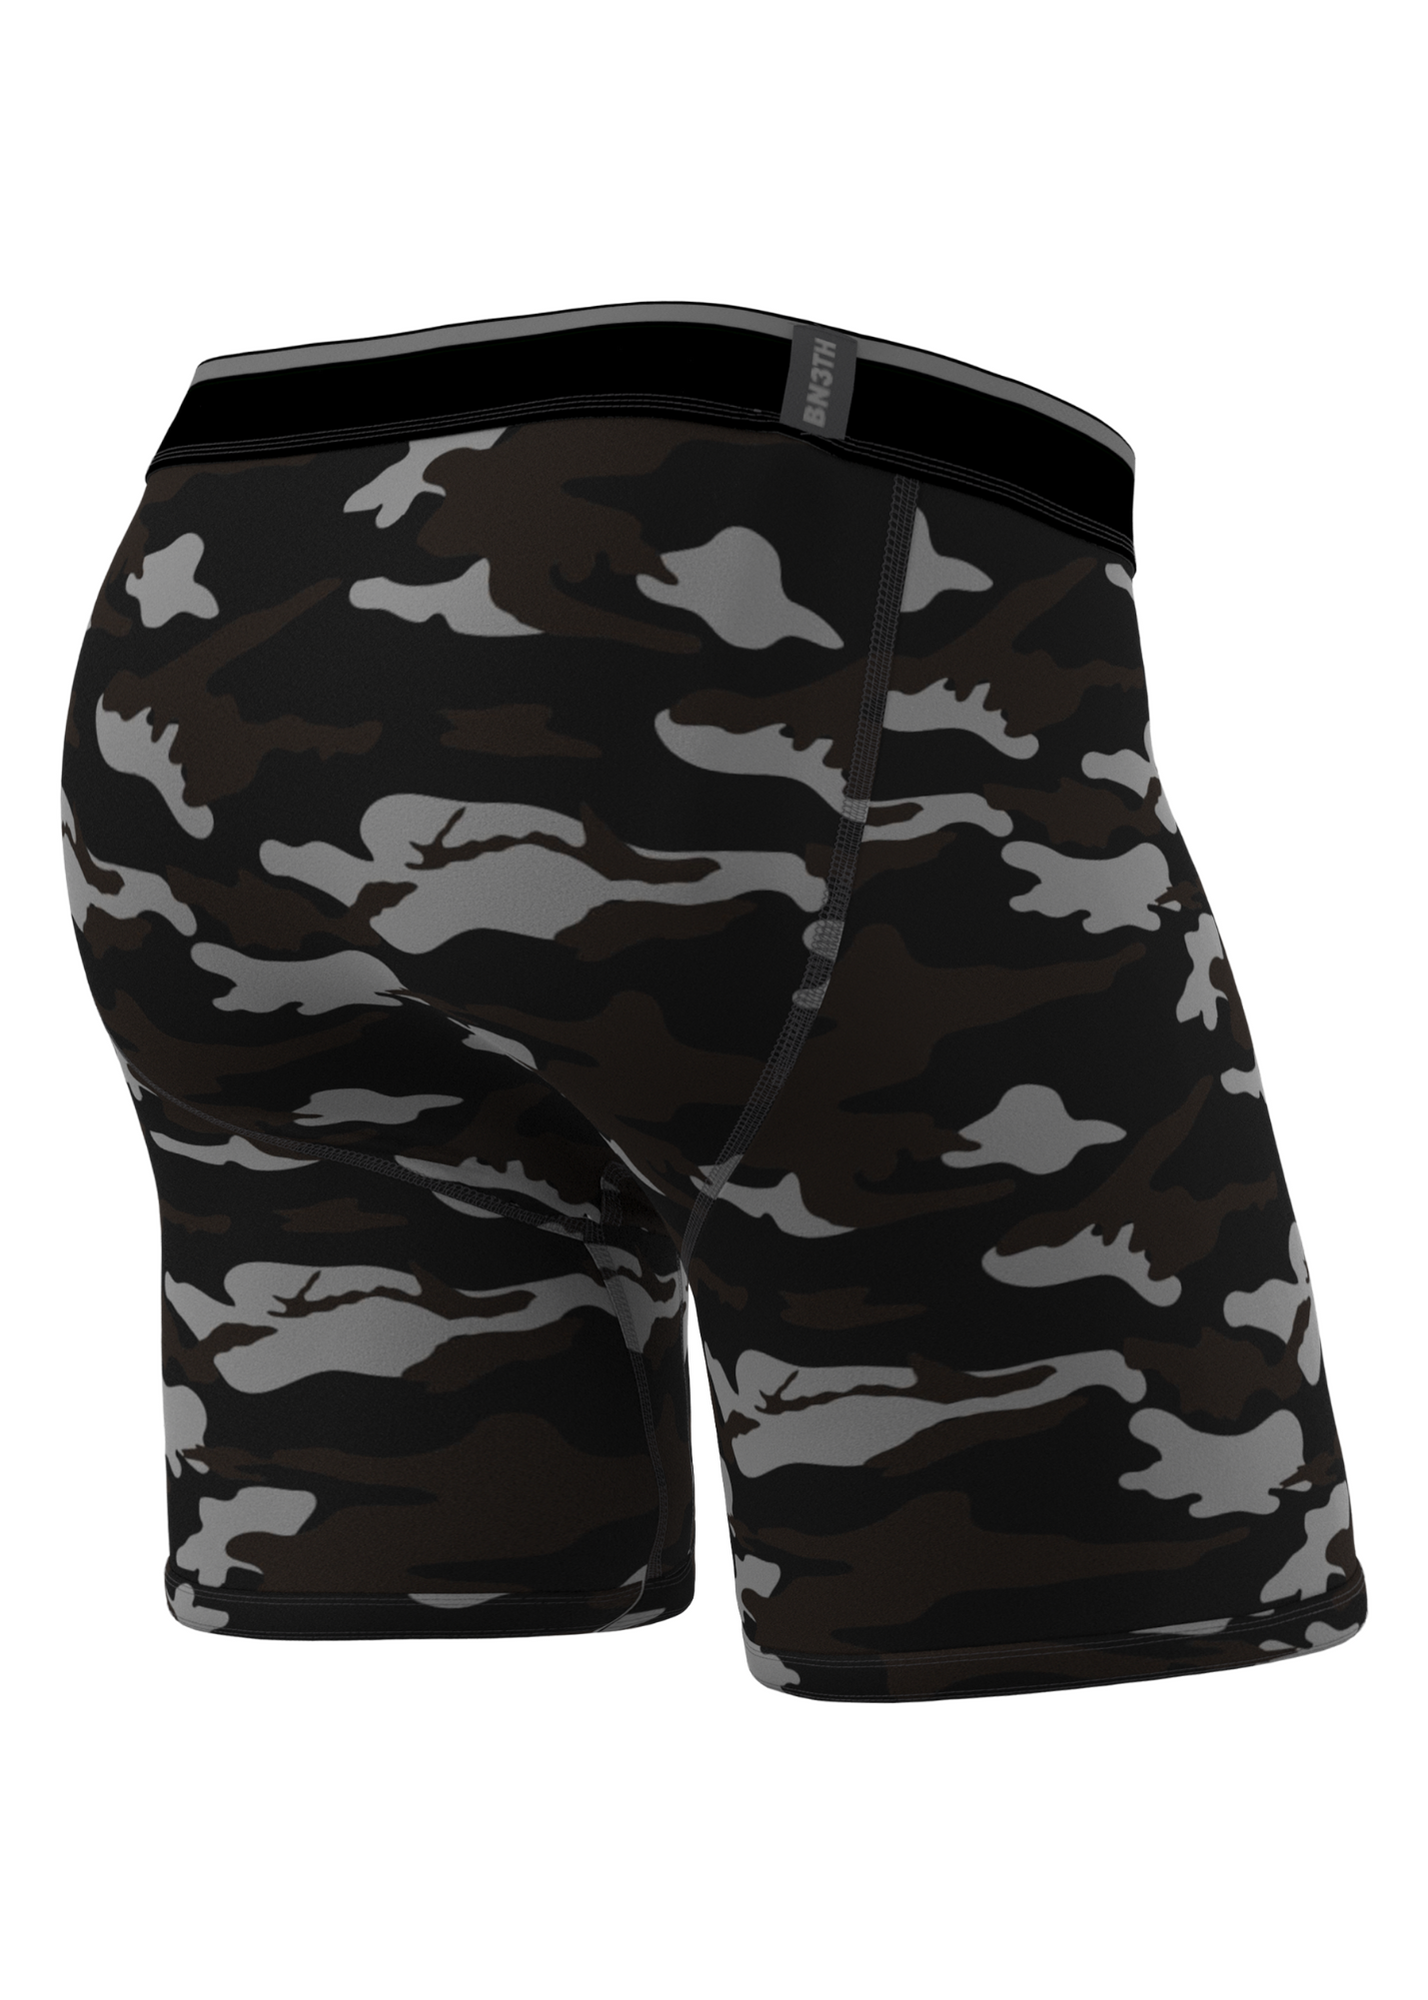 BN3TH Boxer Briefs with Black and Grey Camo Pattern